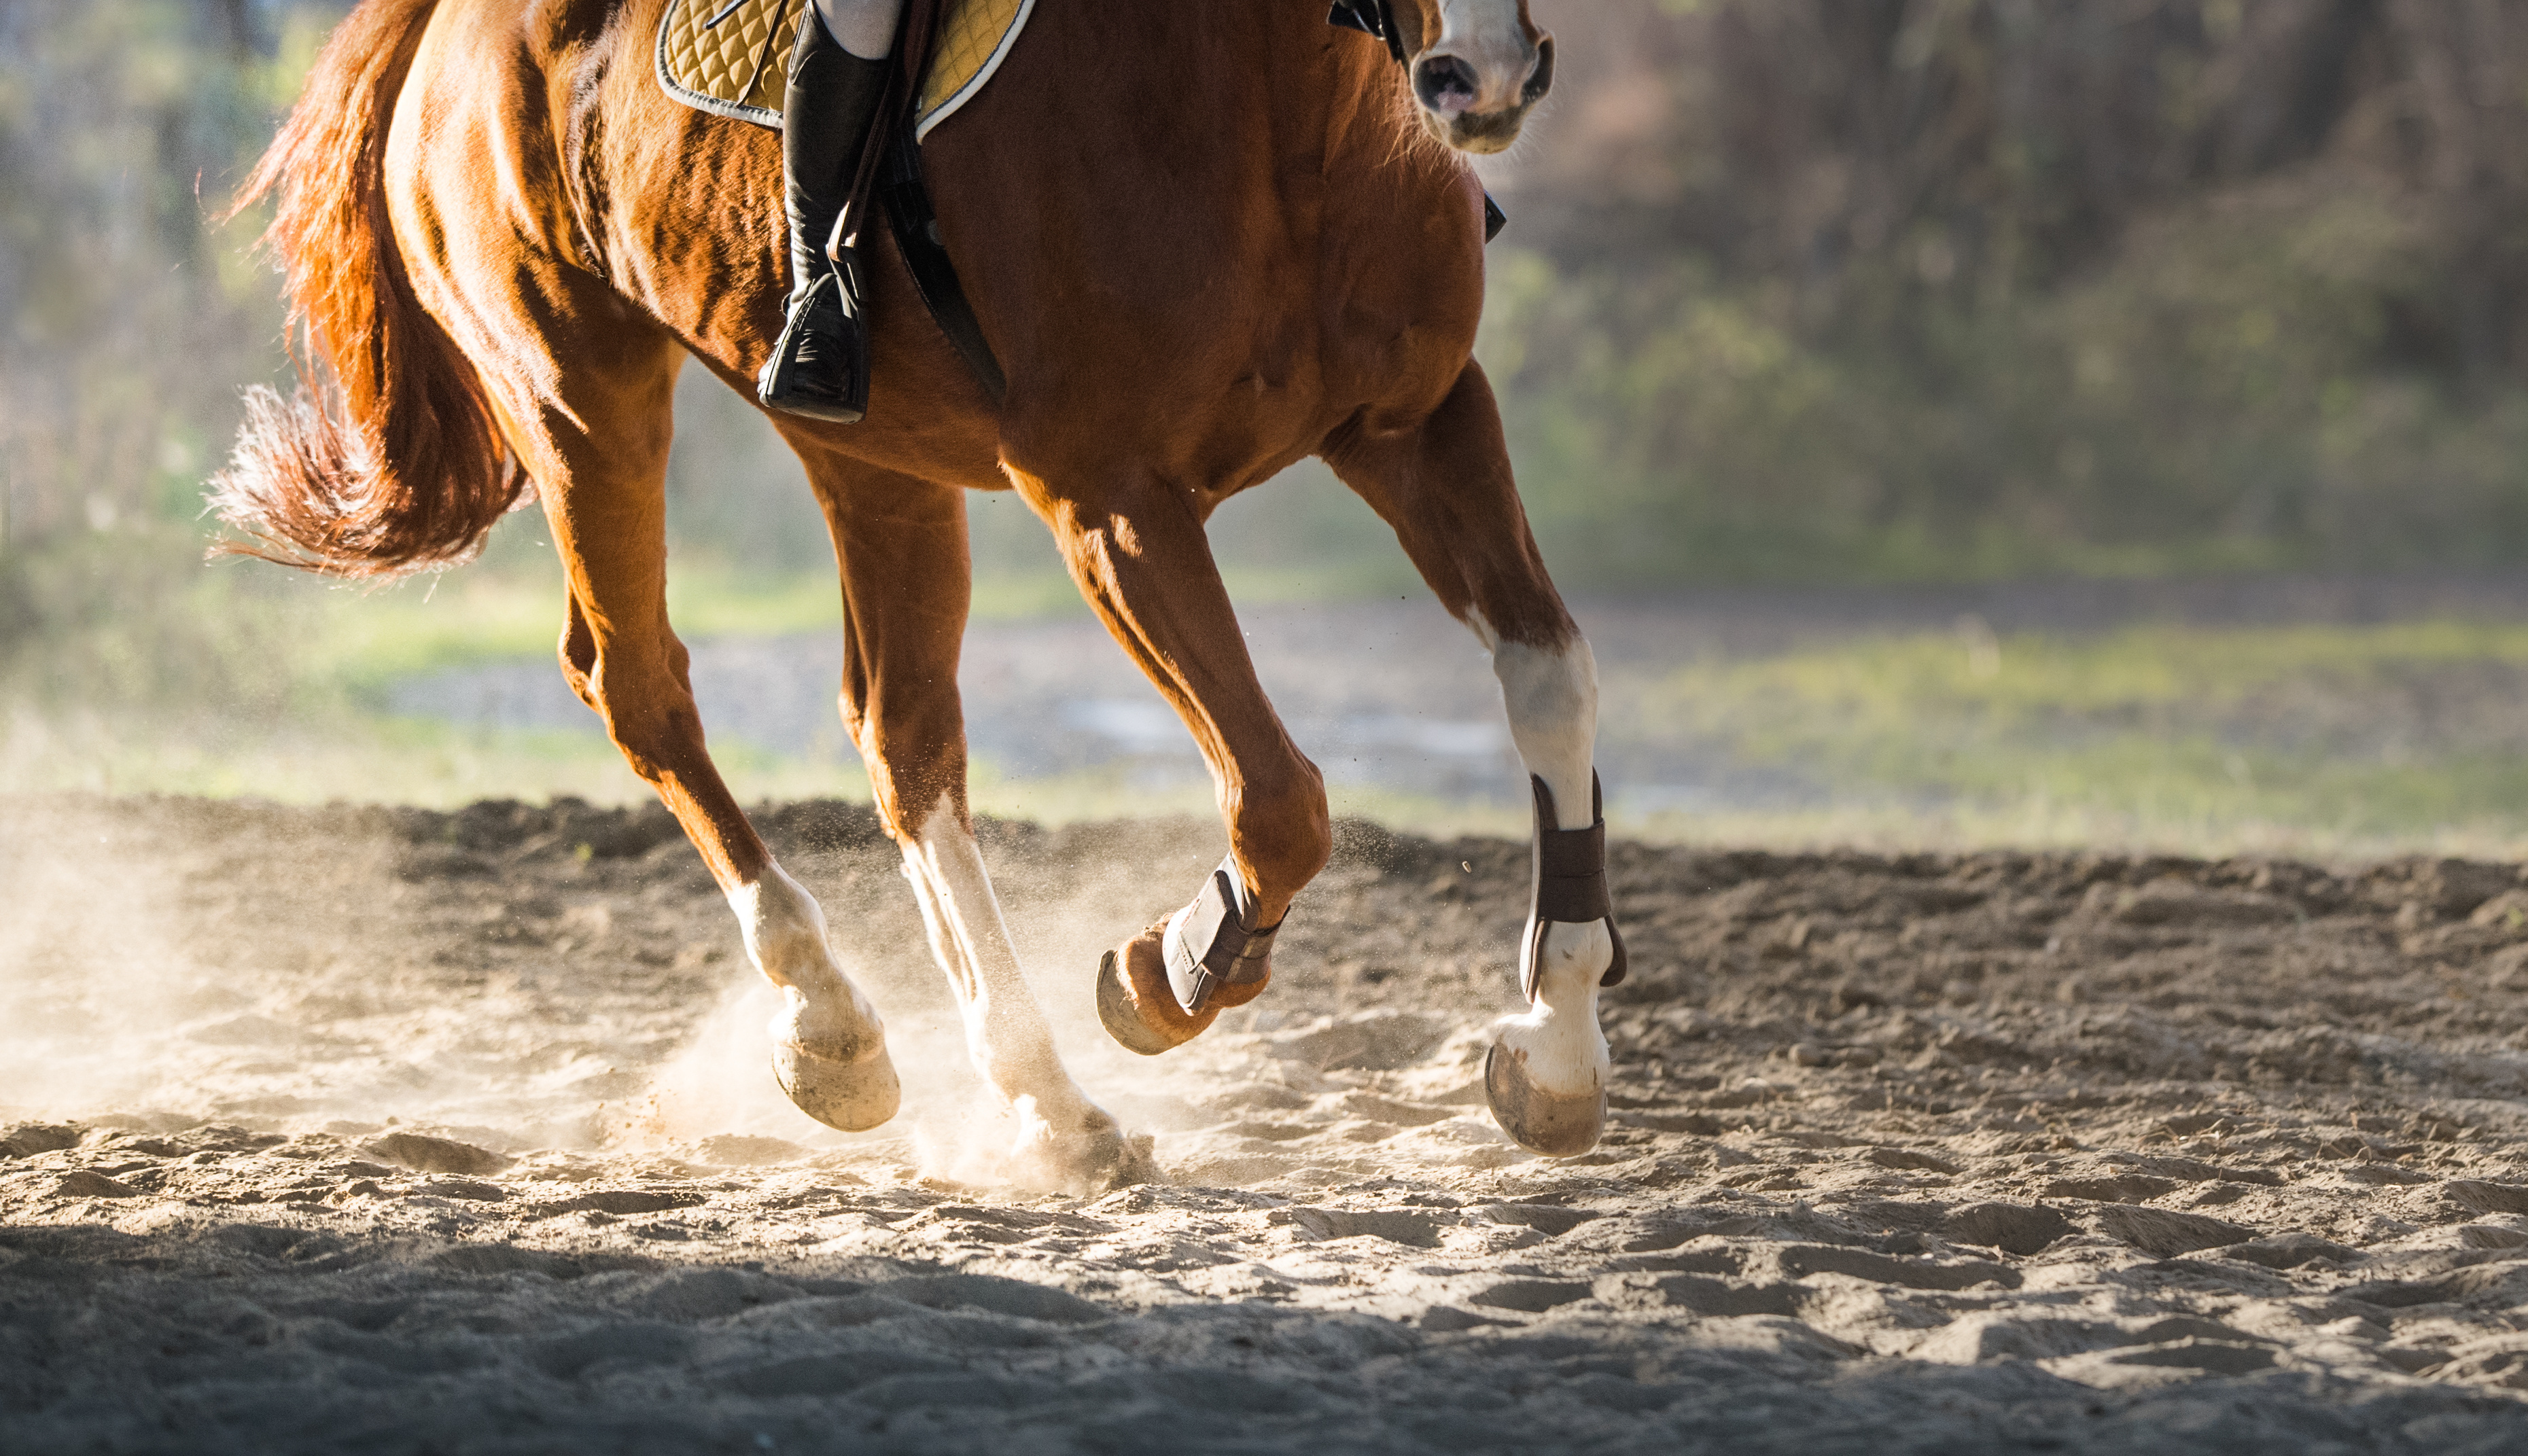 A horse cantering in an arena, wearing boots